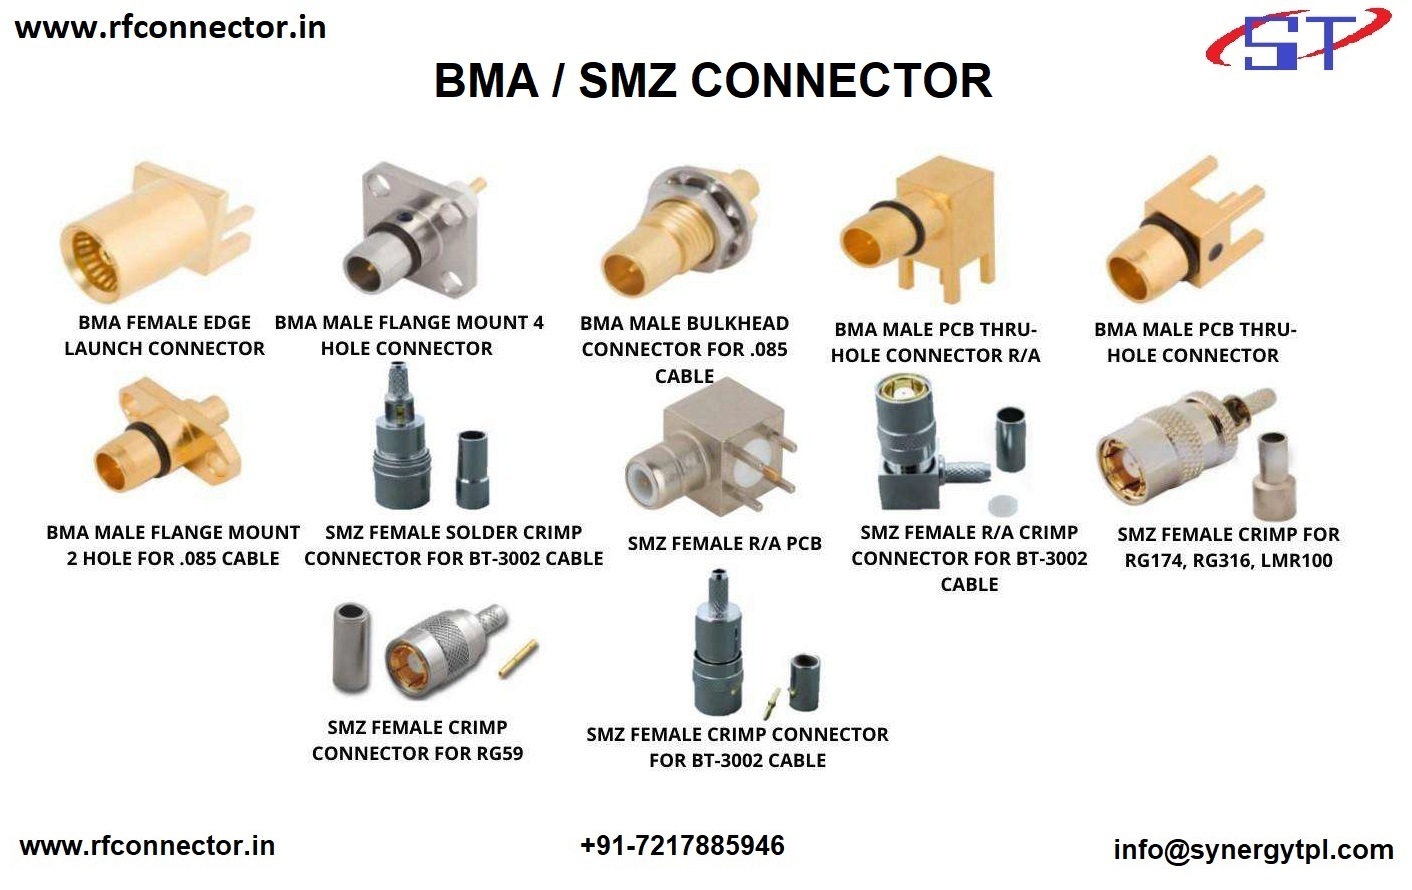 SAA male crimp connector for LMR 100 cable